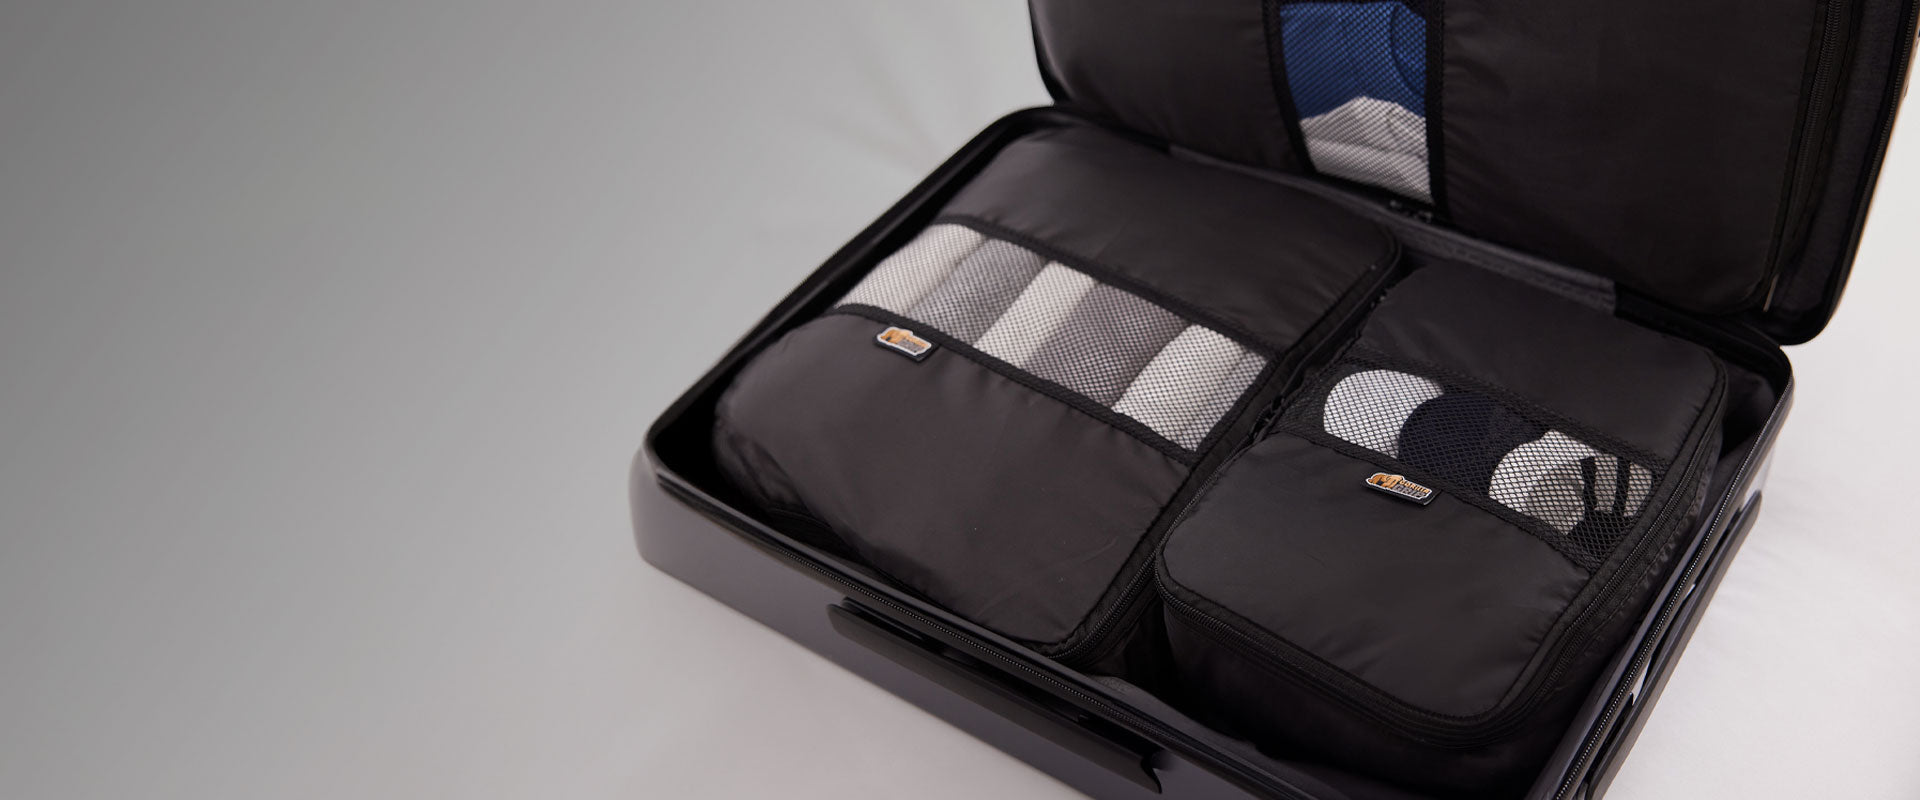 Open suitcase showing Gorilla Grip packing cubes for organized travel